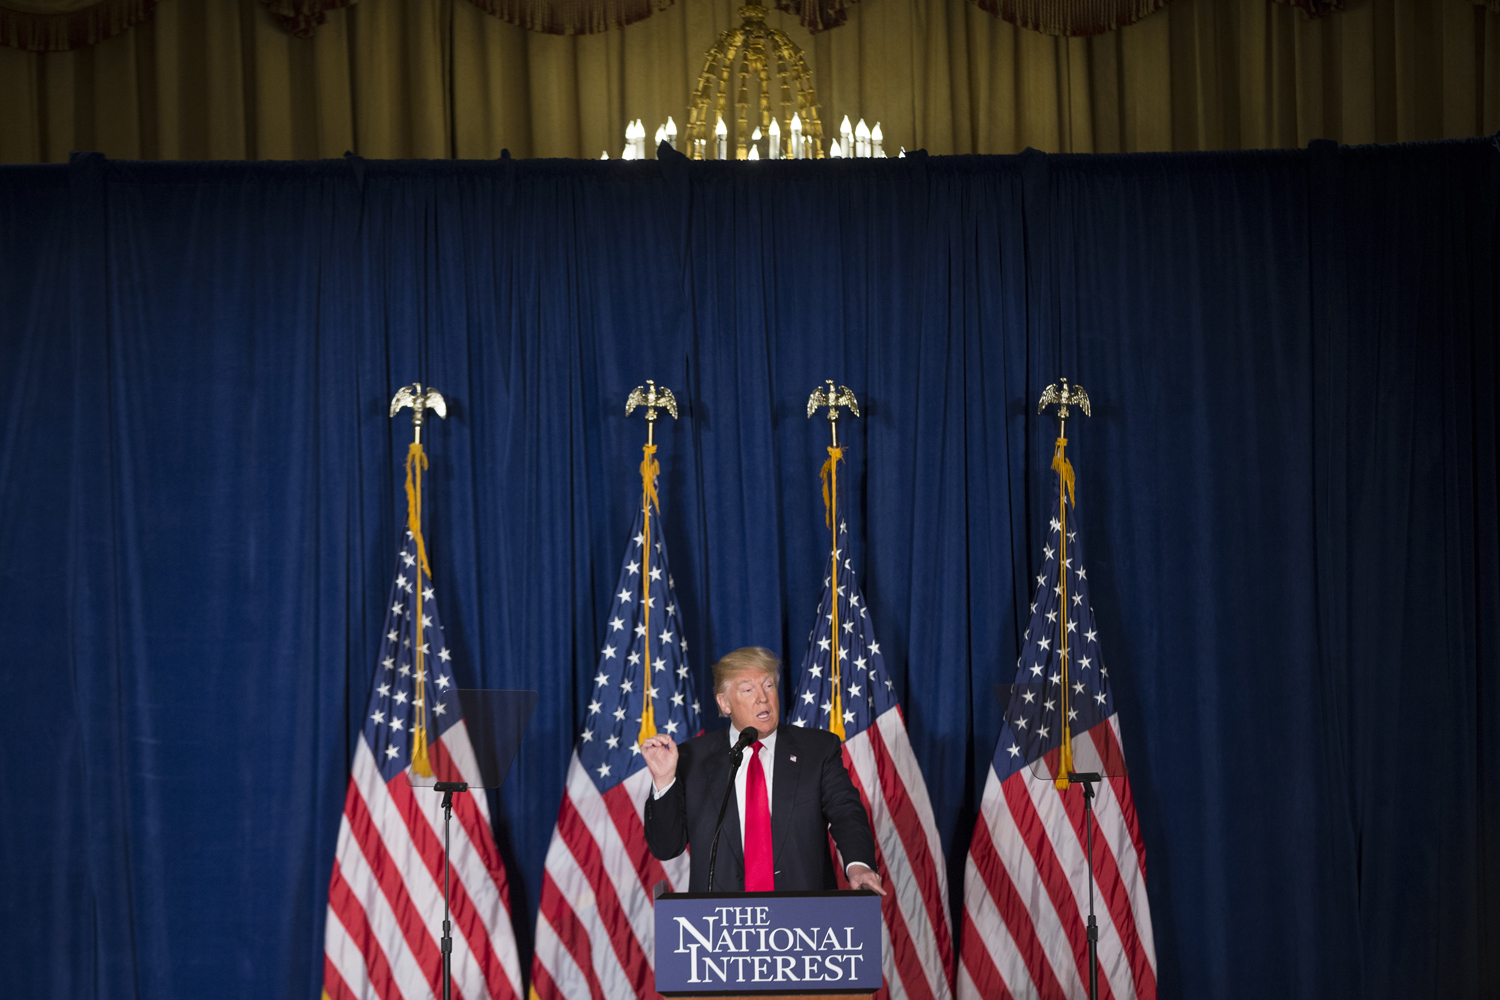 Republican presidential candidate Donald Trump gives a foreign policy speech at the Mayflower Hotel in Washington, Wednesday, April 27, 2016. (Evan Vucci/AP)